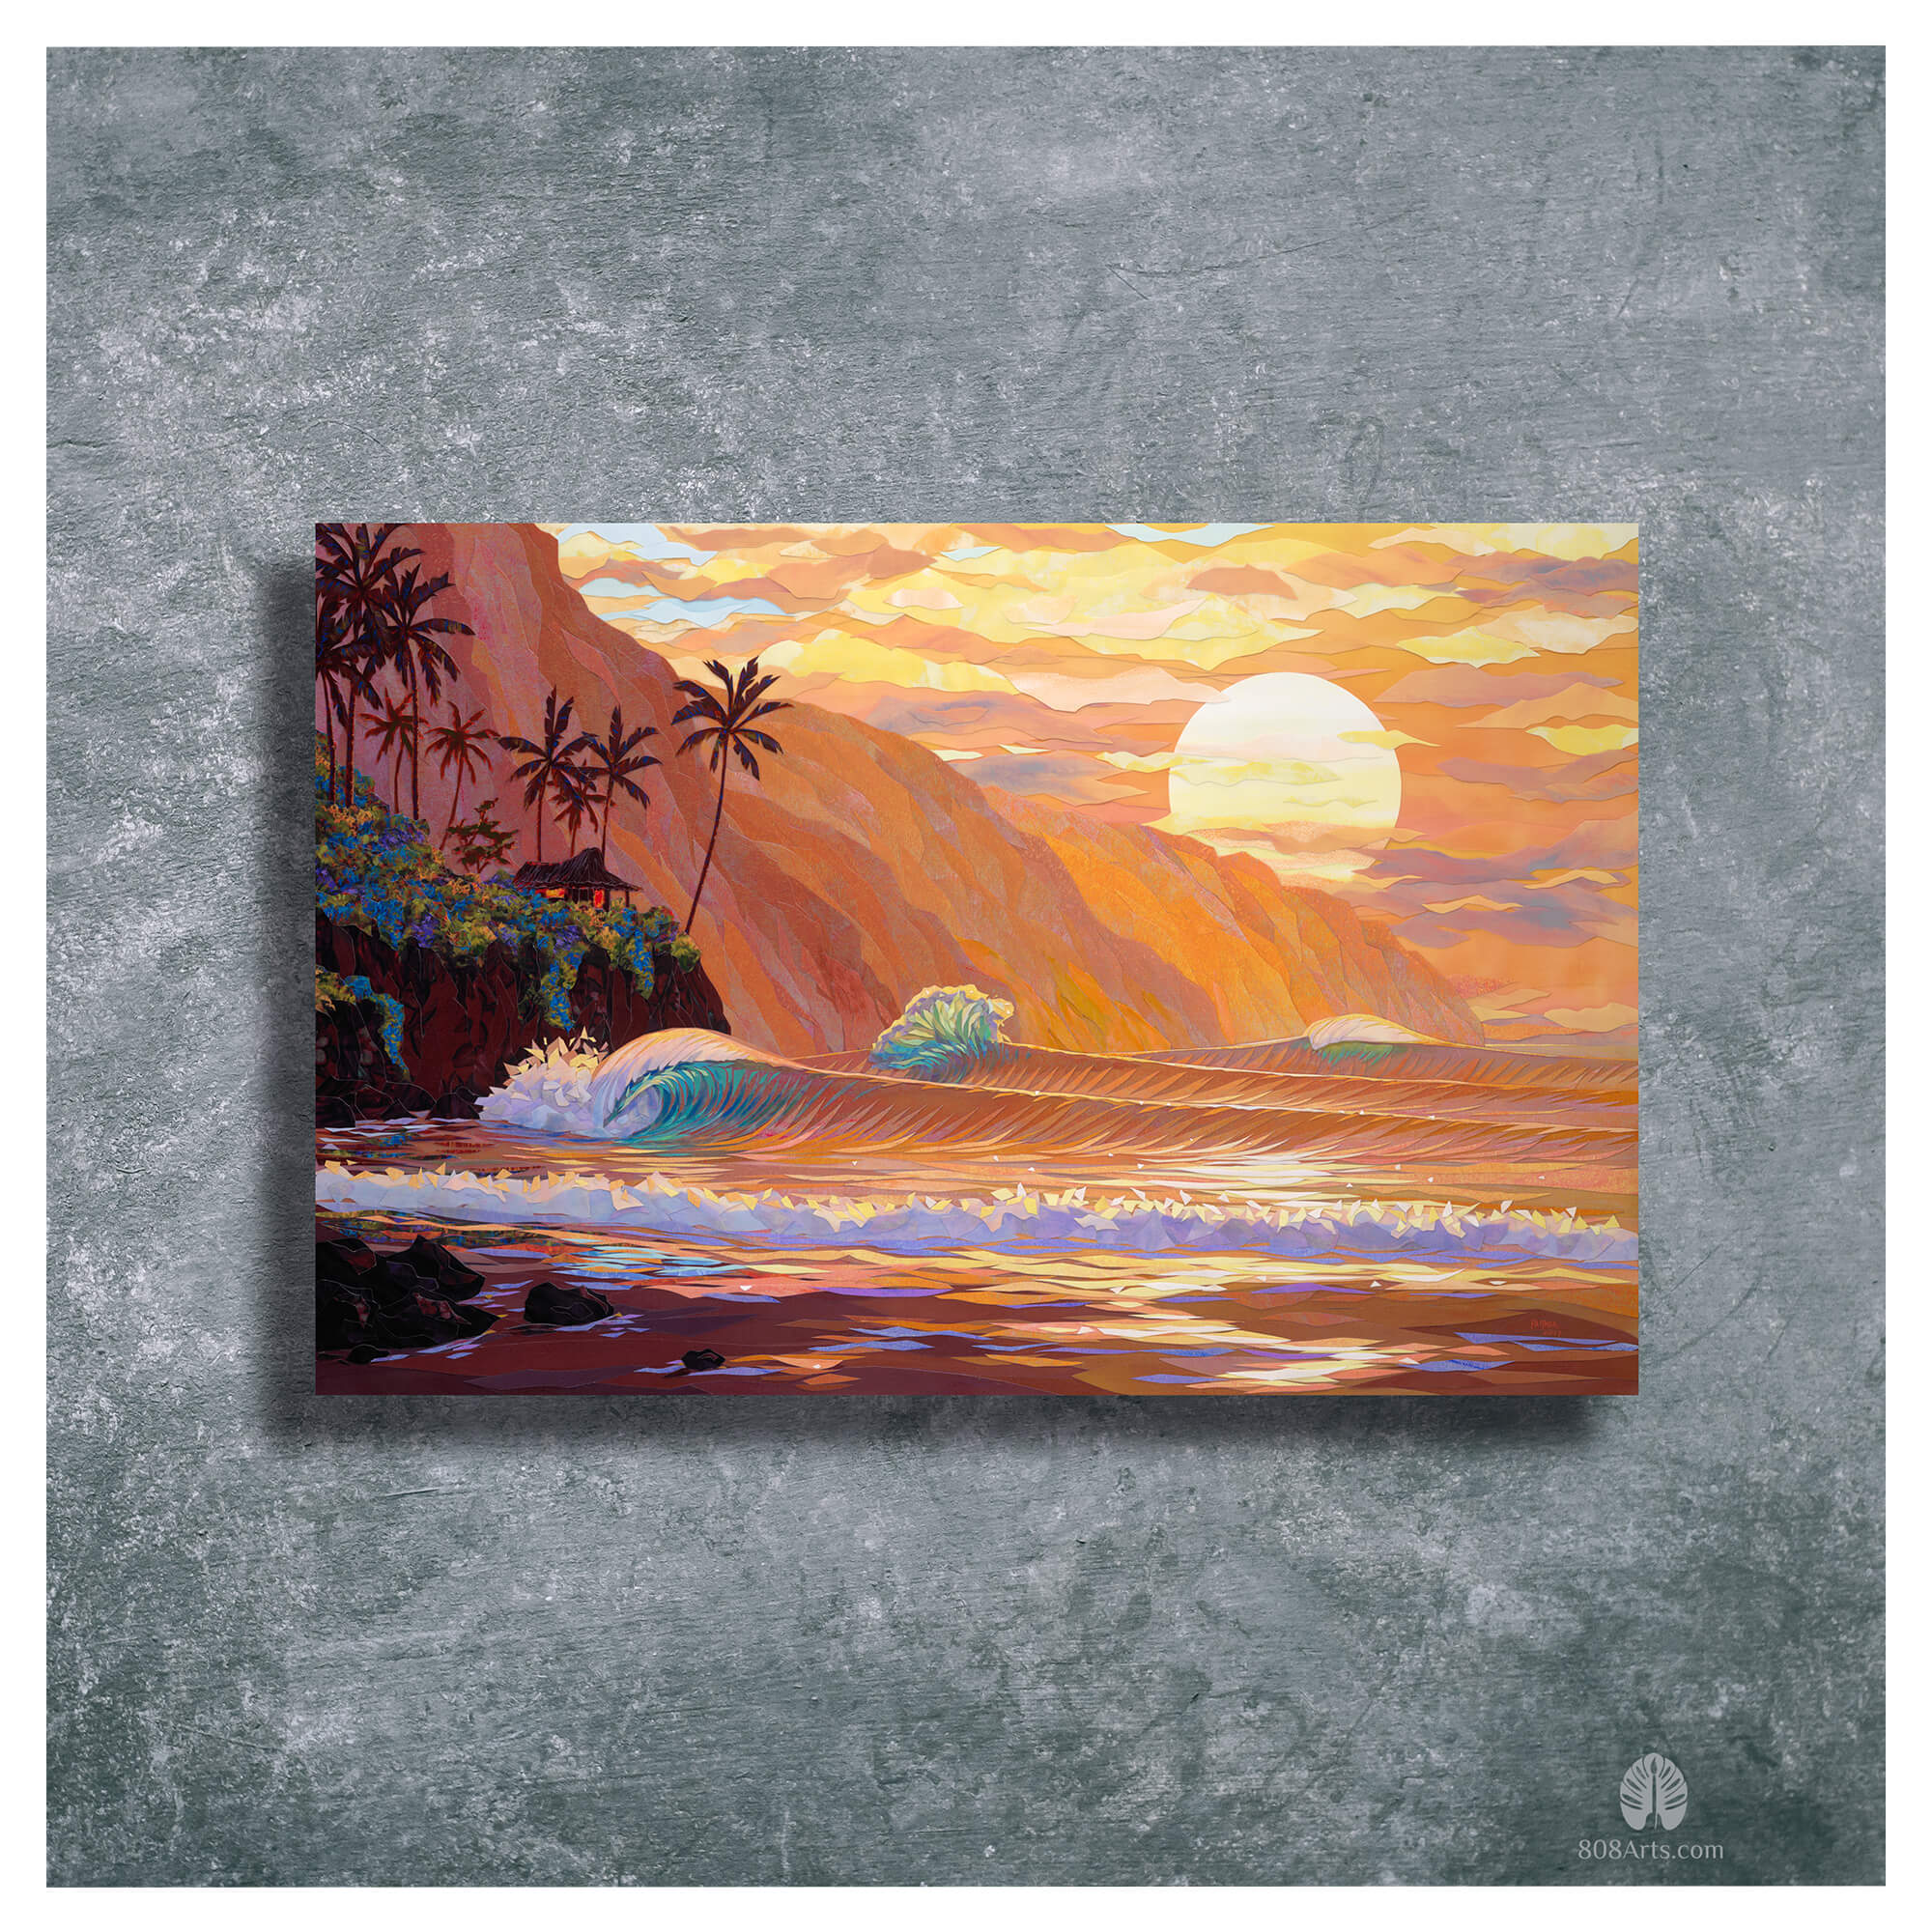 A metal art print featuring a collage of a sunset view of the ocean as seen from a tropical beach in Hawaii, and a mountain background, by Maui artist Patrick Parker